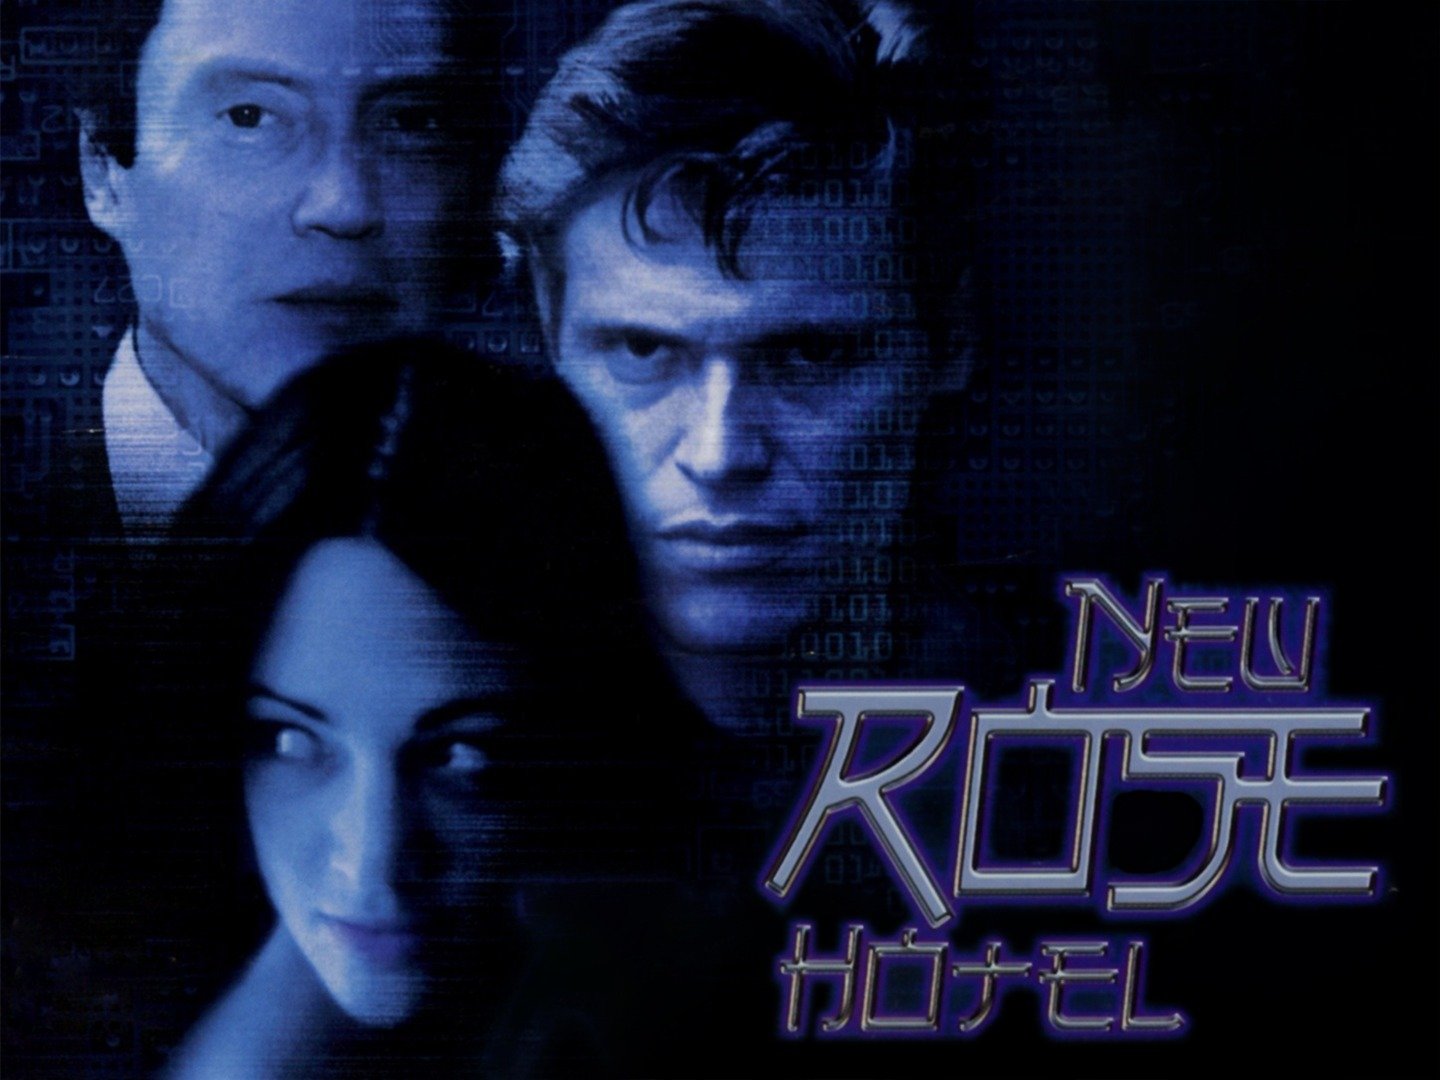 New Rose Hotel (1998) - Rotten Tomatoes